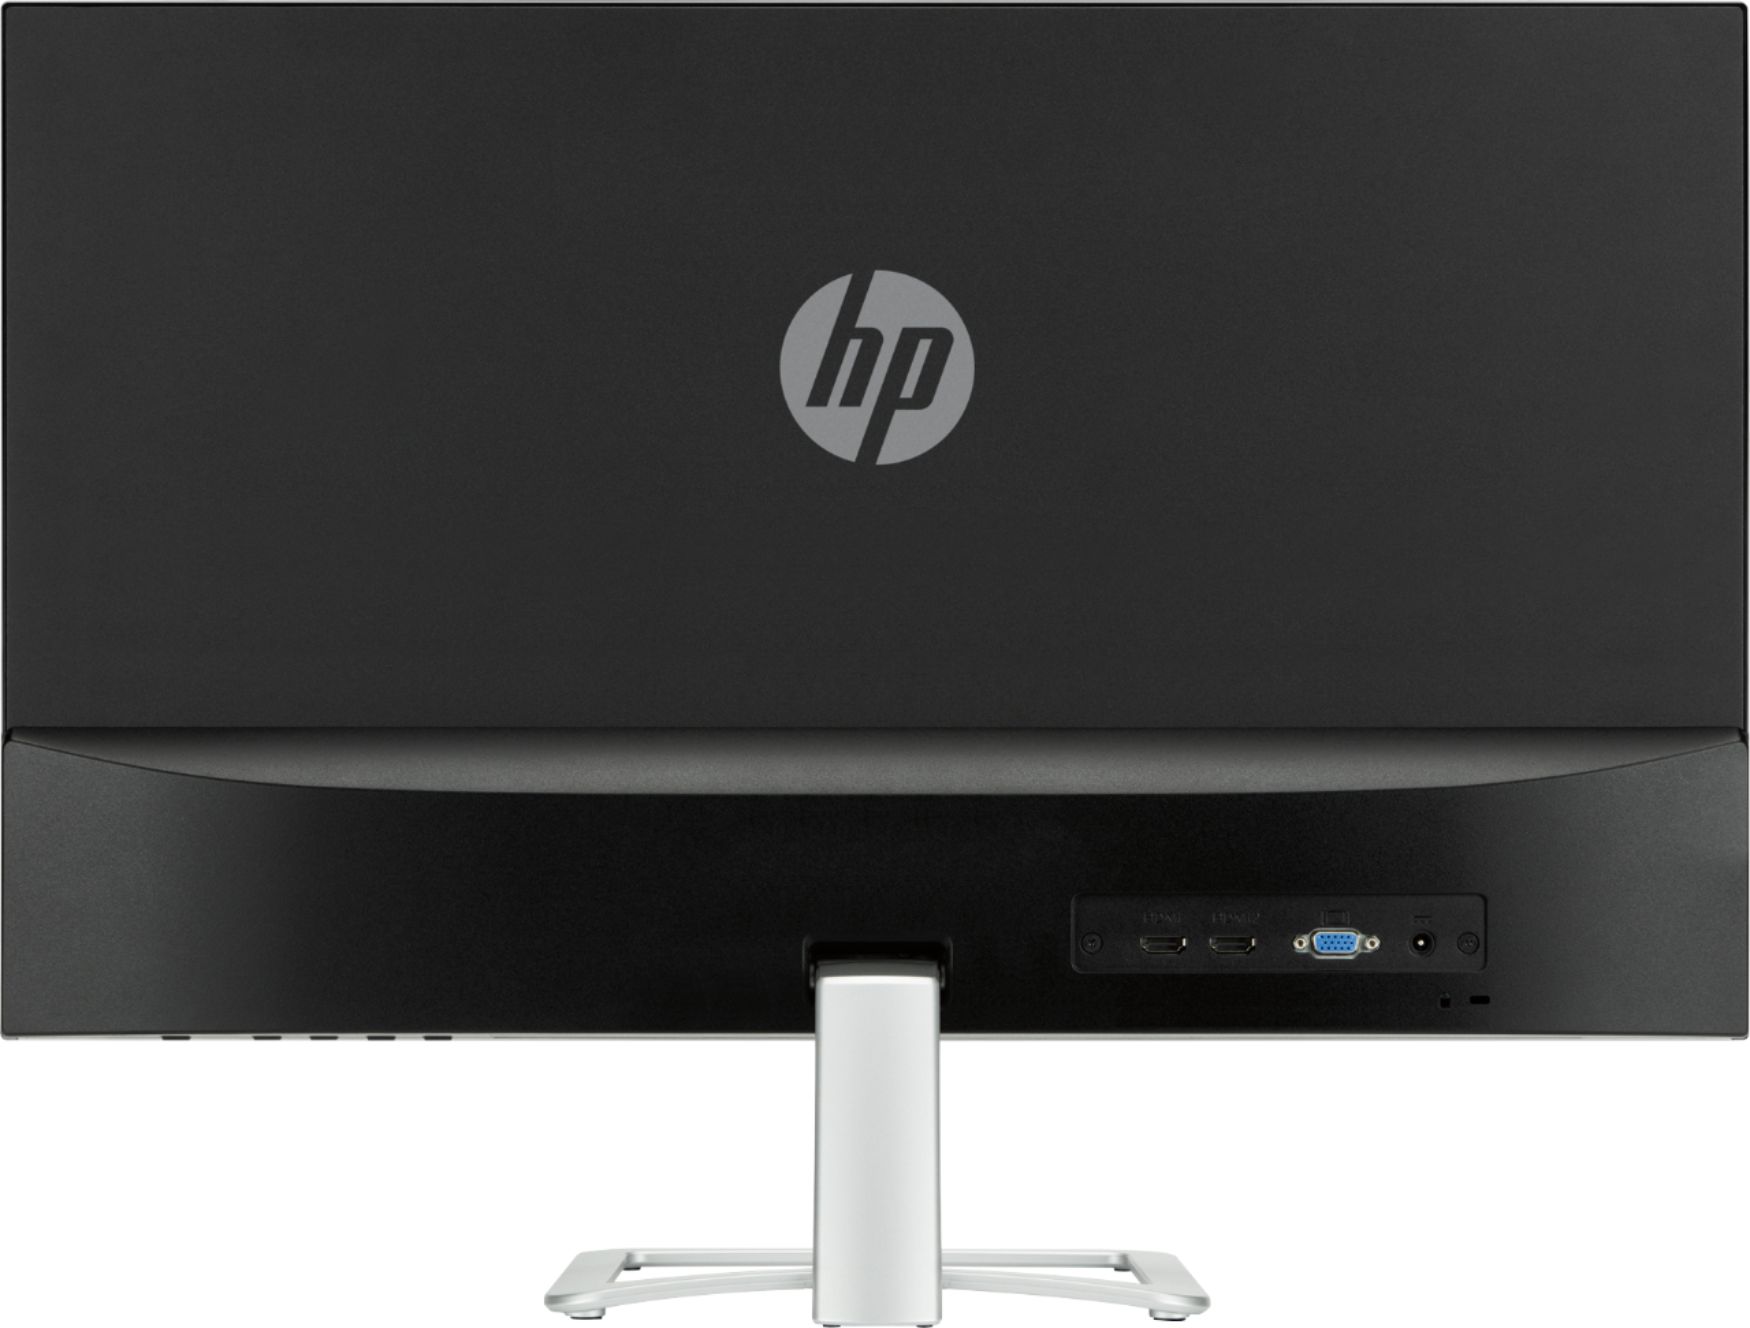 Back View: HP - Geek Squad Certified Refurbished 27" IPS LED FHD Monitor - Natural Silver